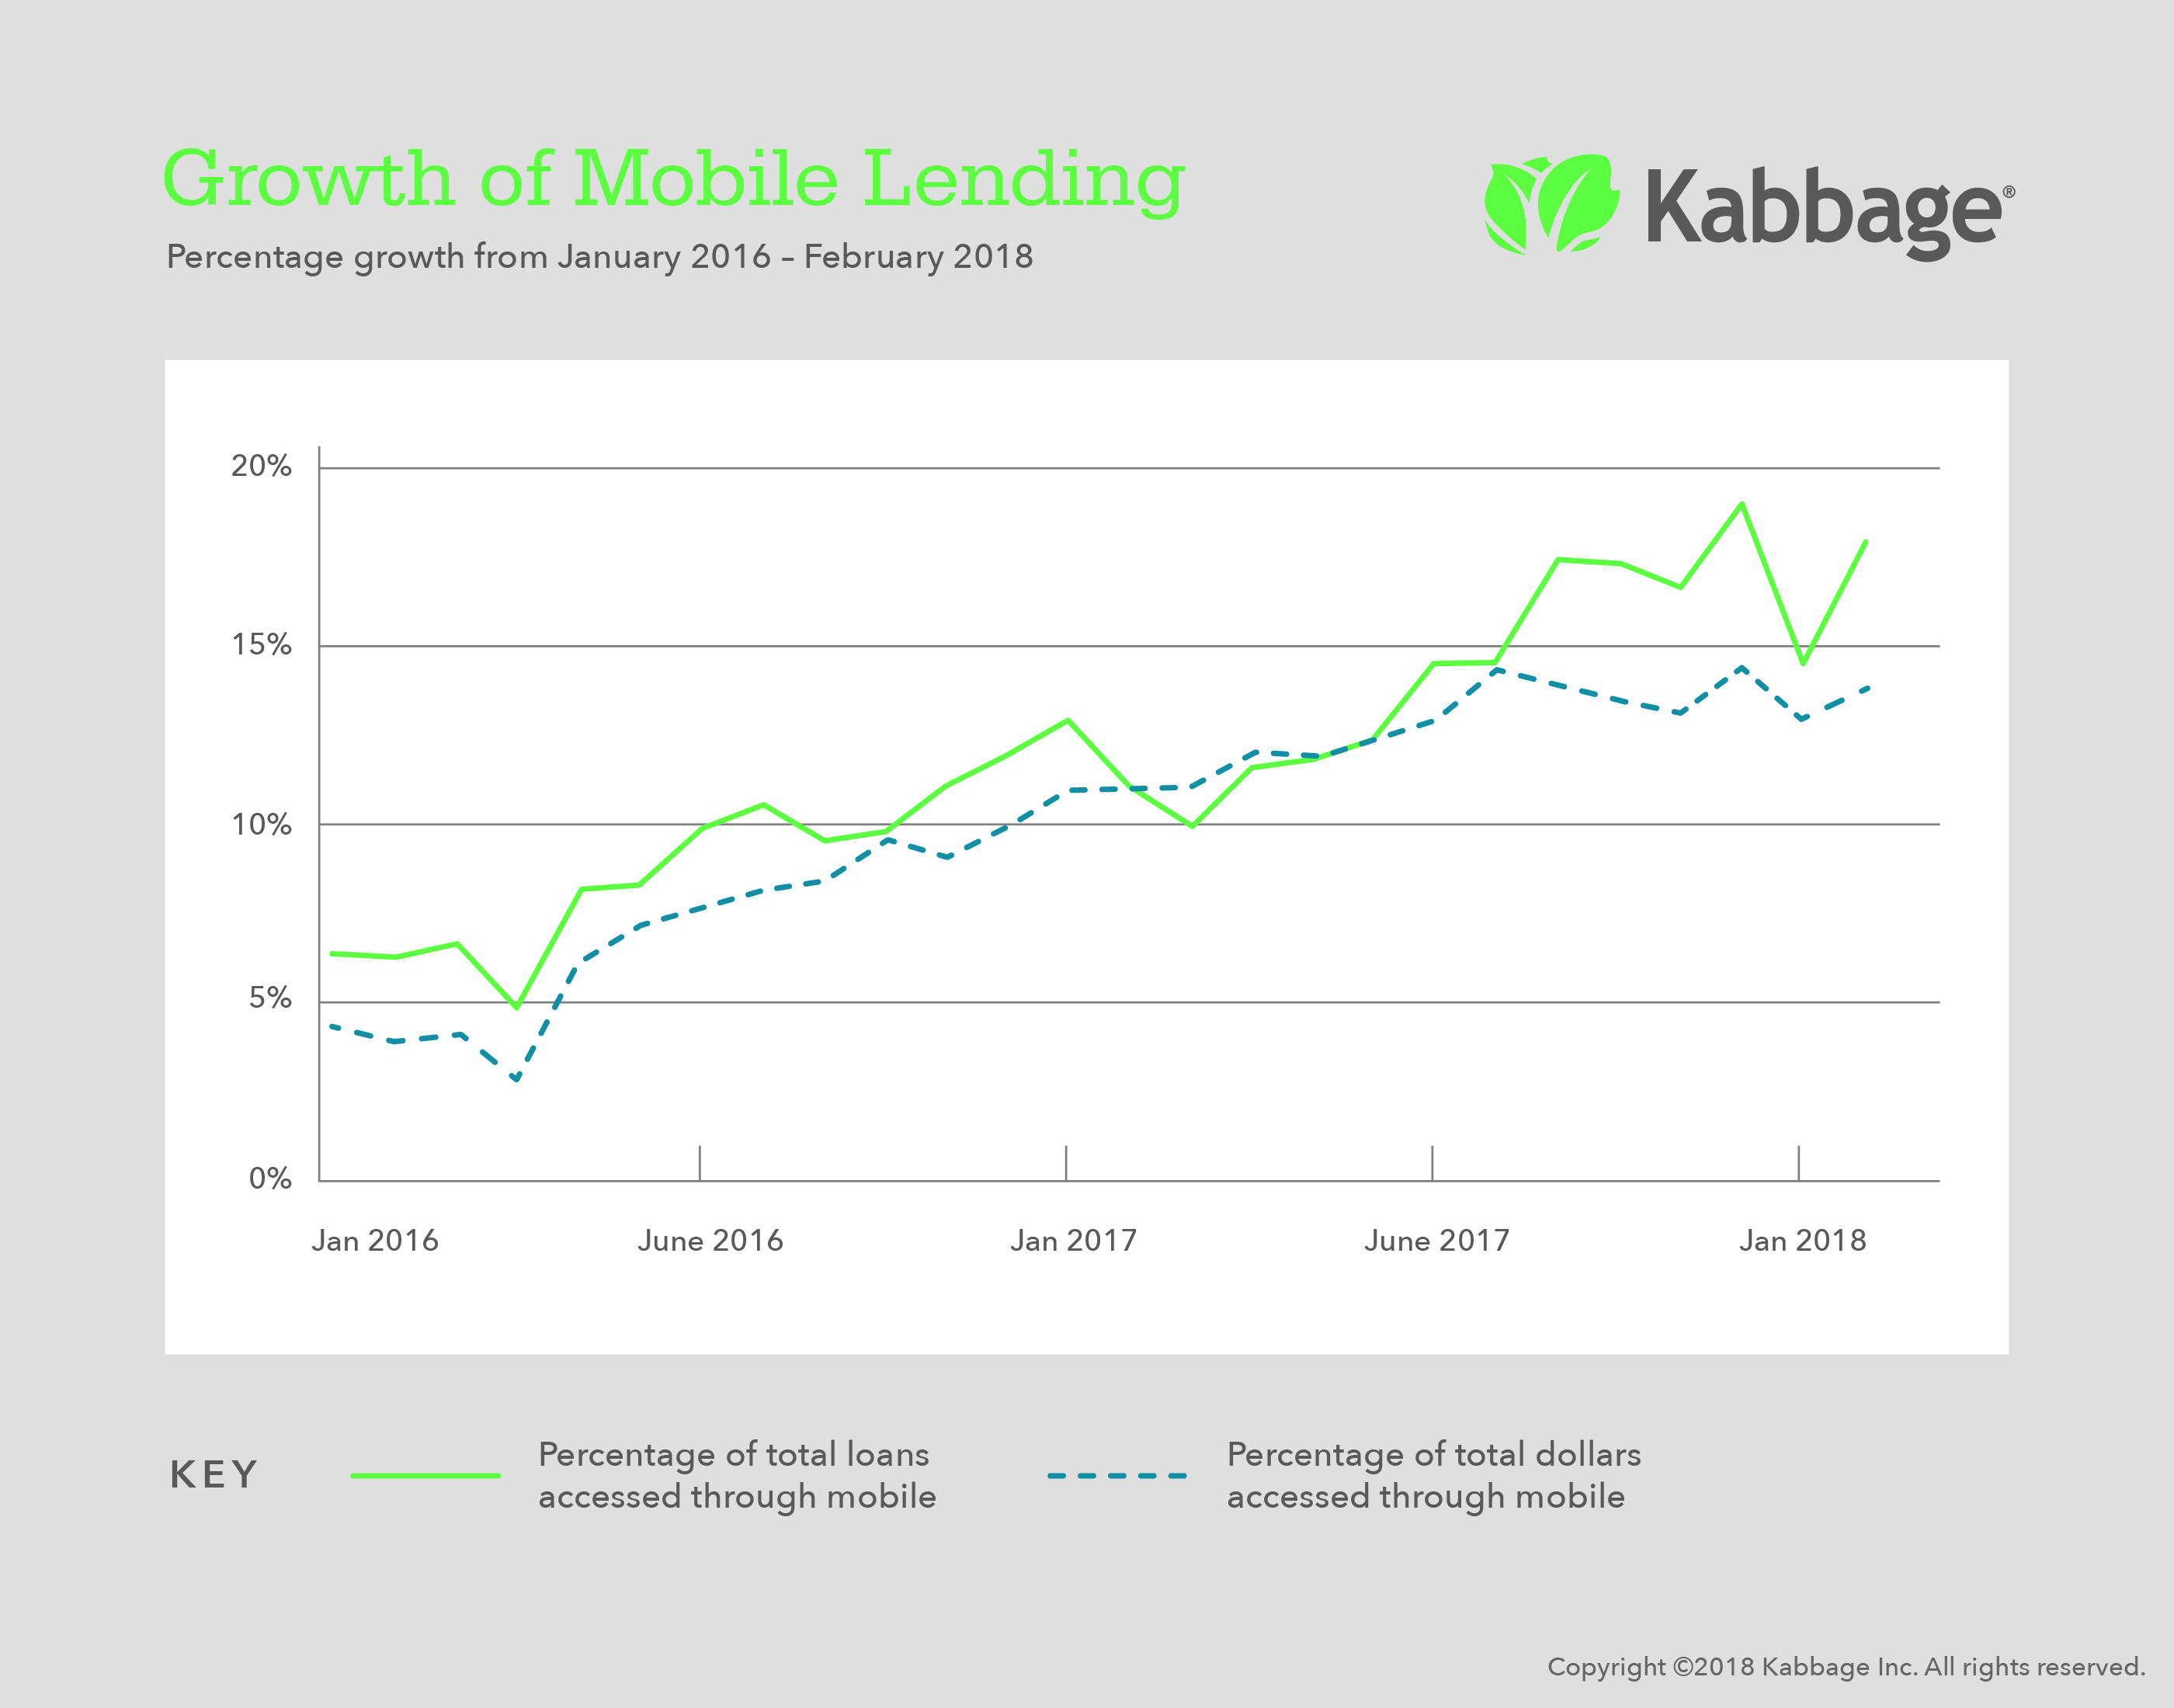 Kabbage shows high growth rate of mobile lending among small business owners.